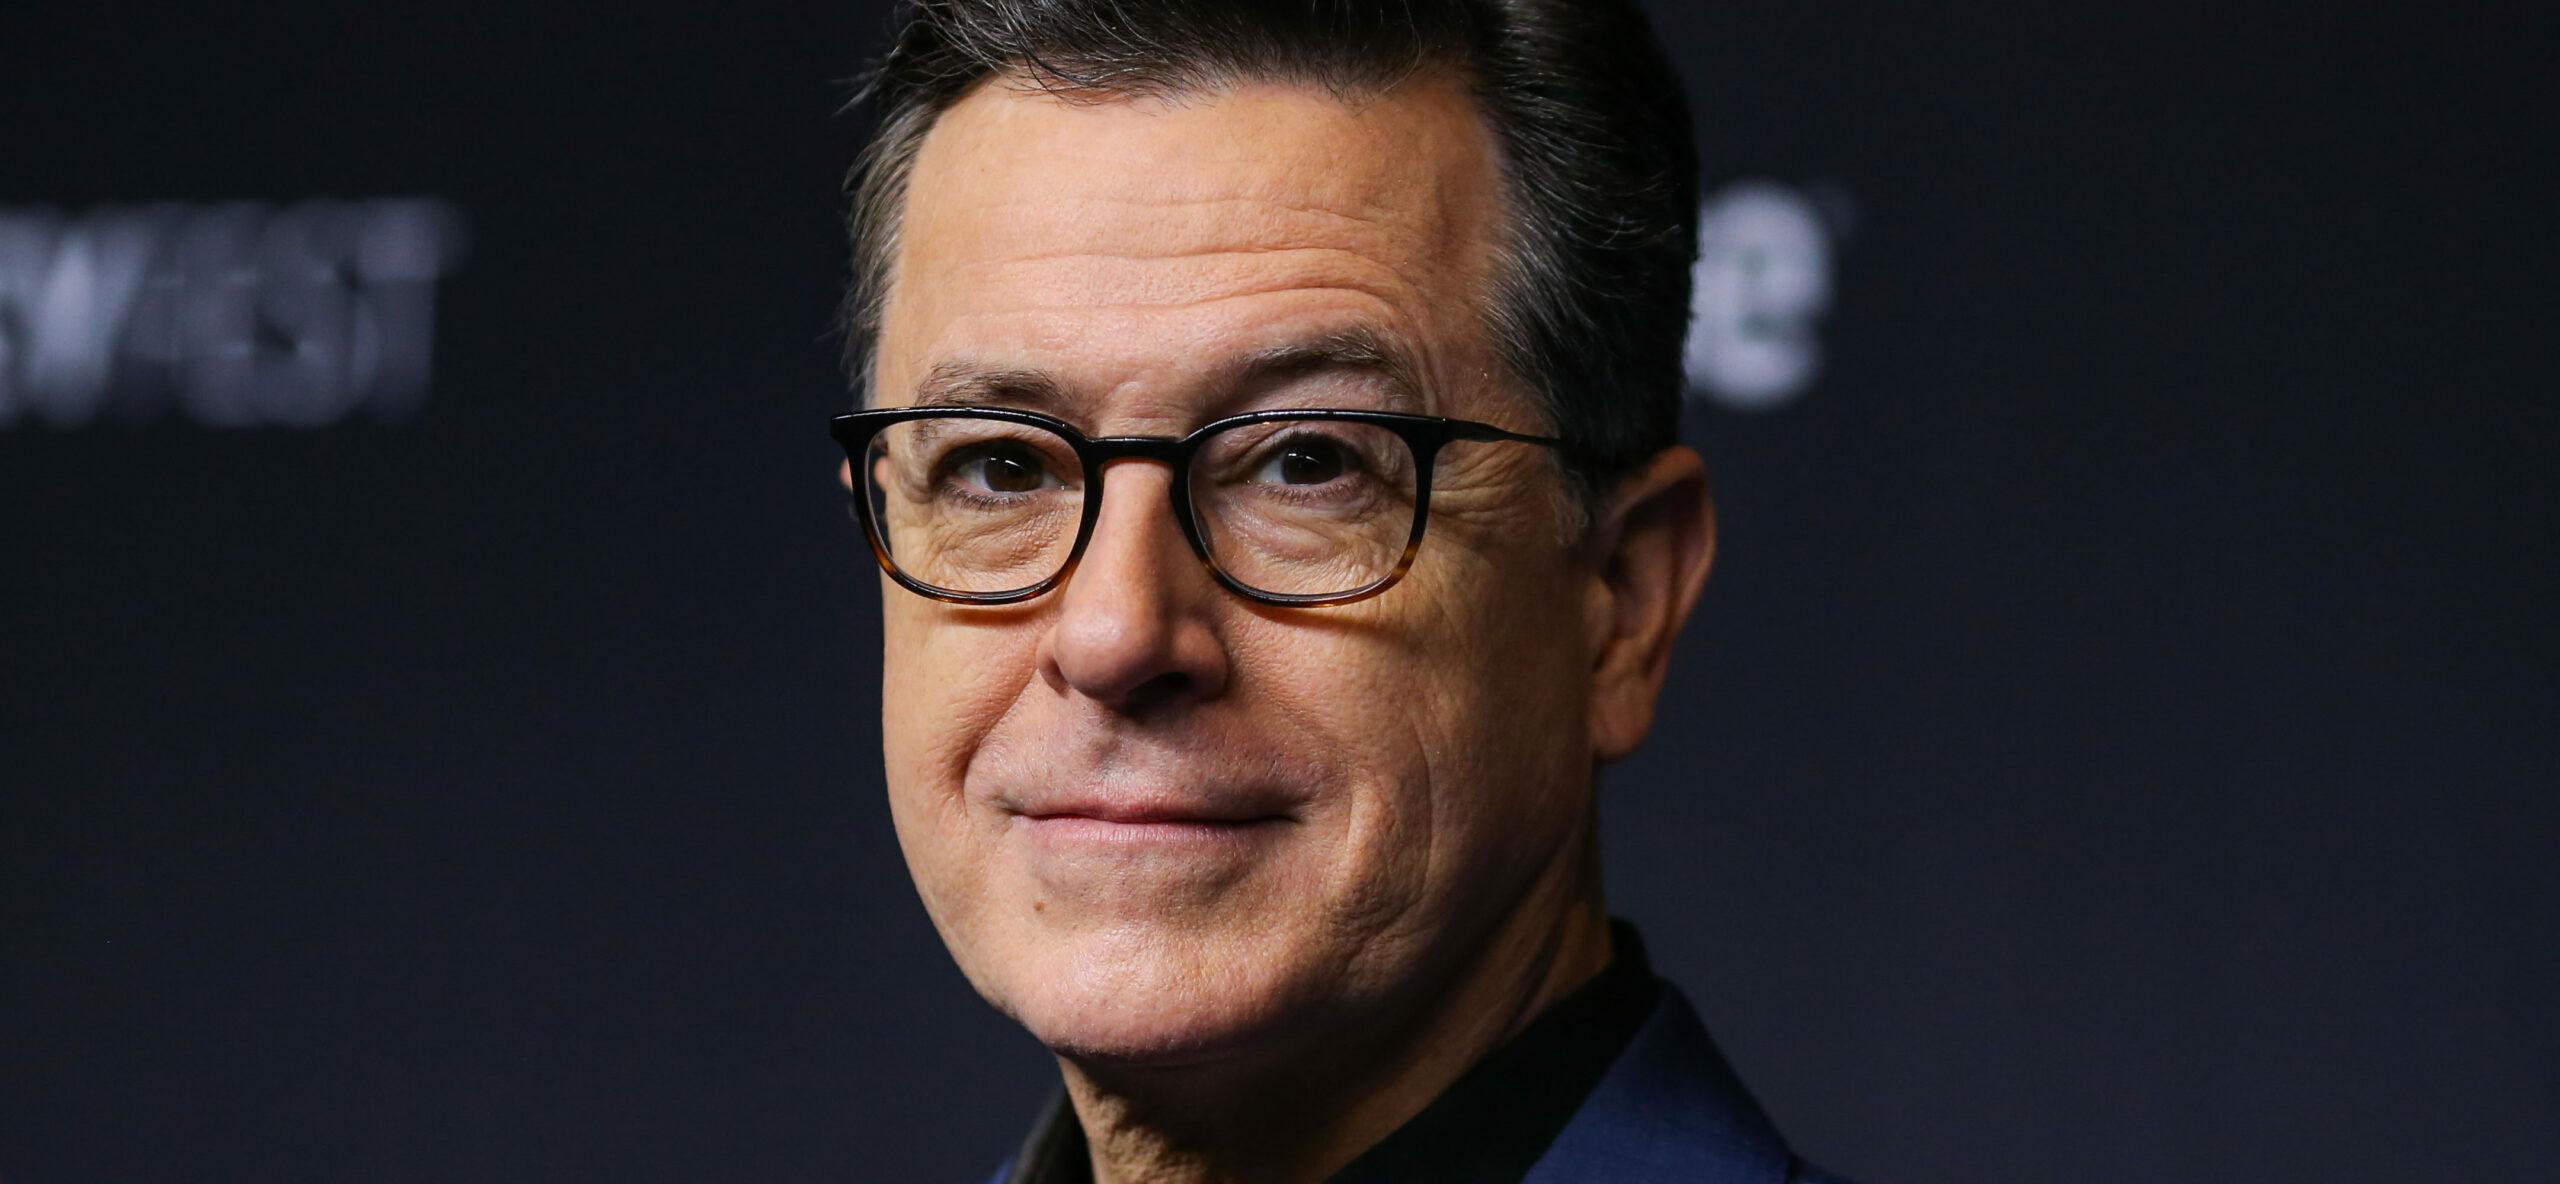 ‘The Late Show’ Extends Break As Stephen Colbert Recovers From Ruptured Appendix